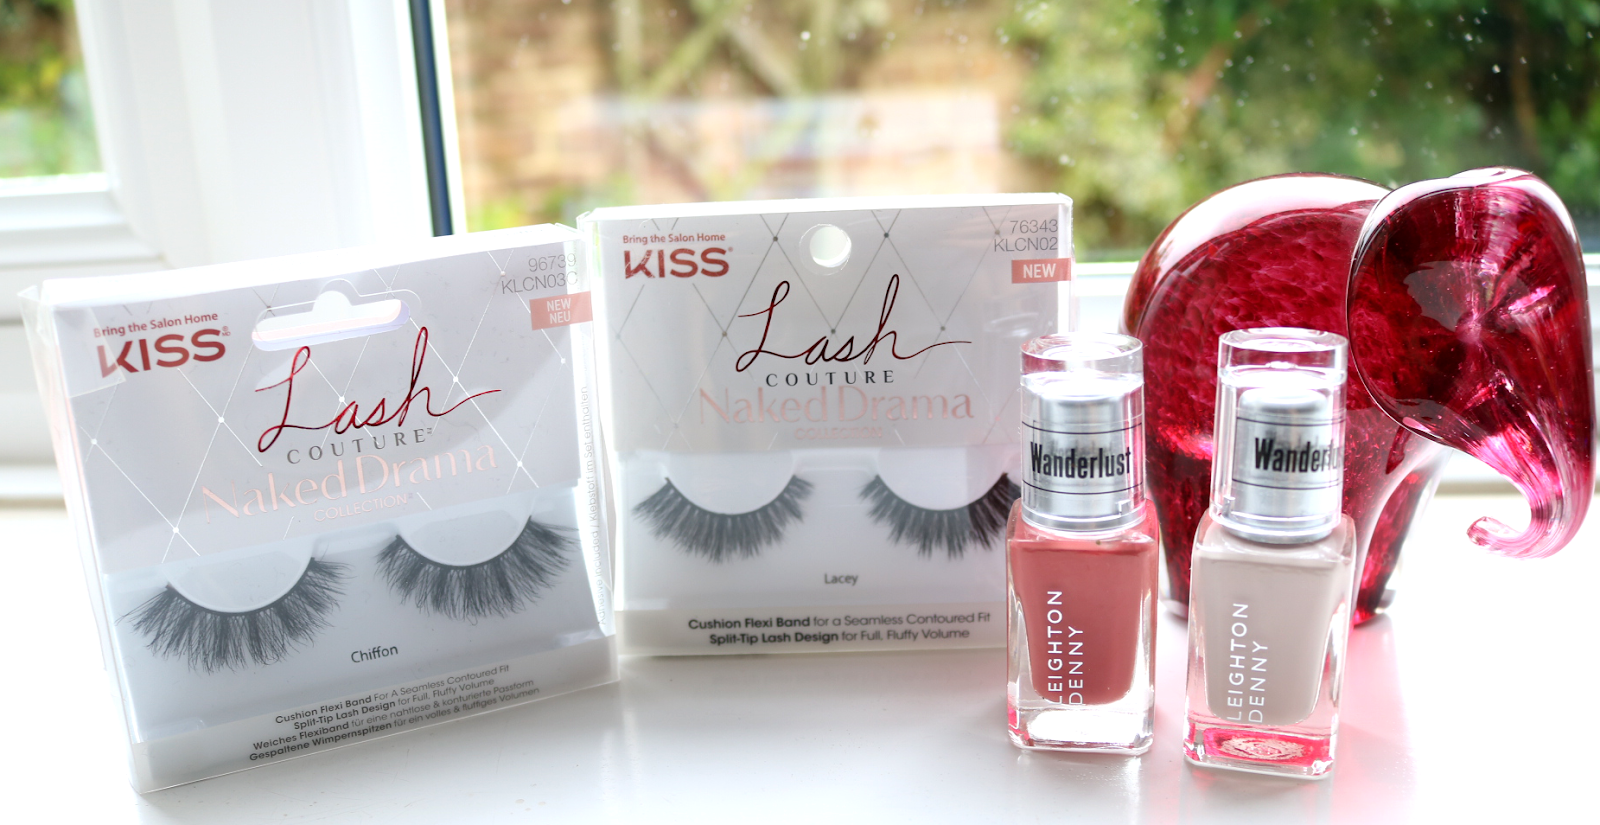 New In Beauty: Lashes & Nails from Kiss and Leighton Denny - Review & Swatches